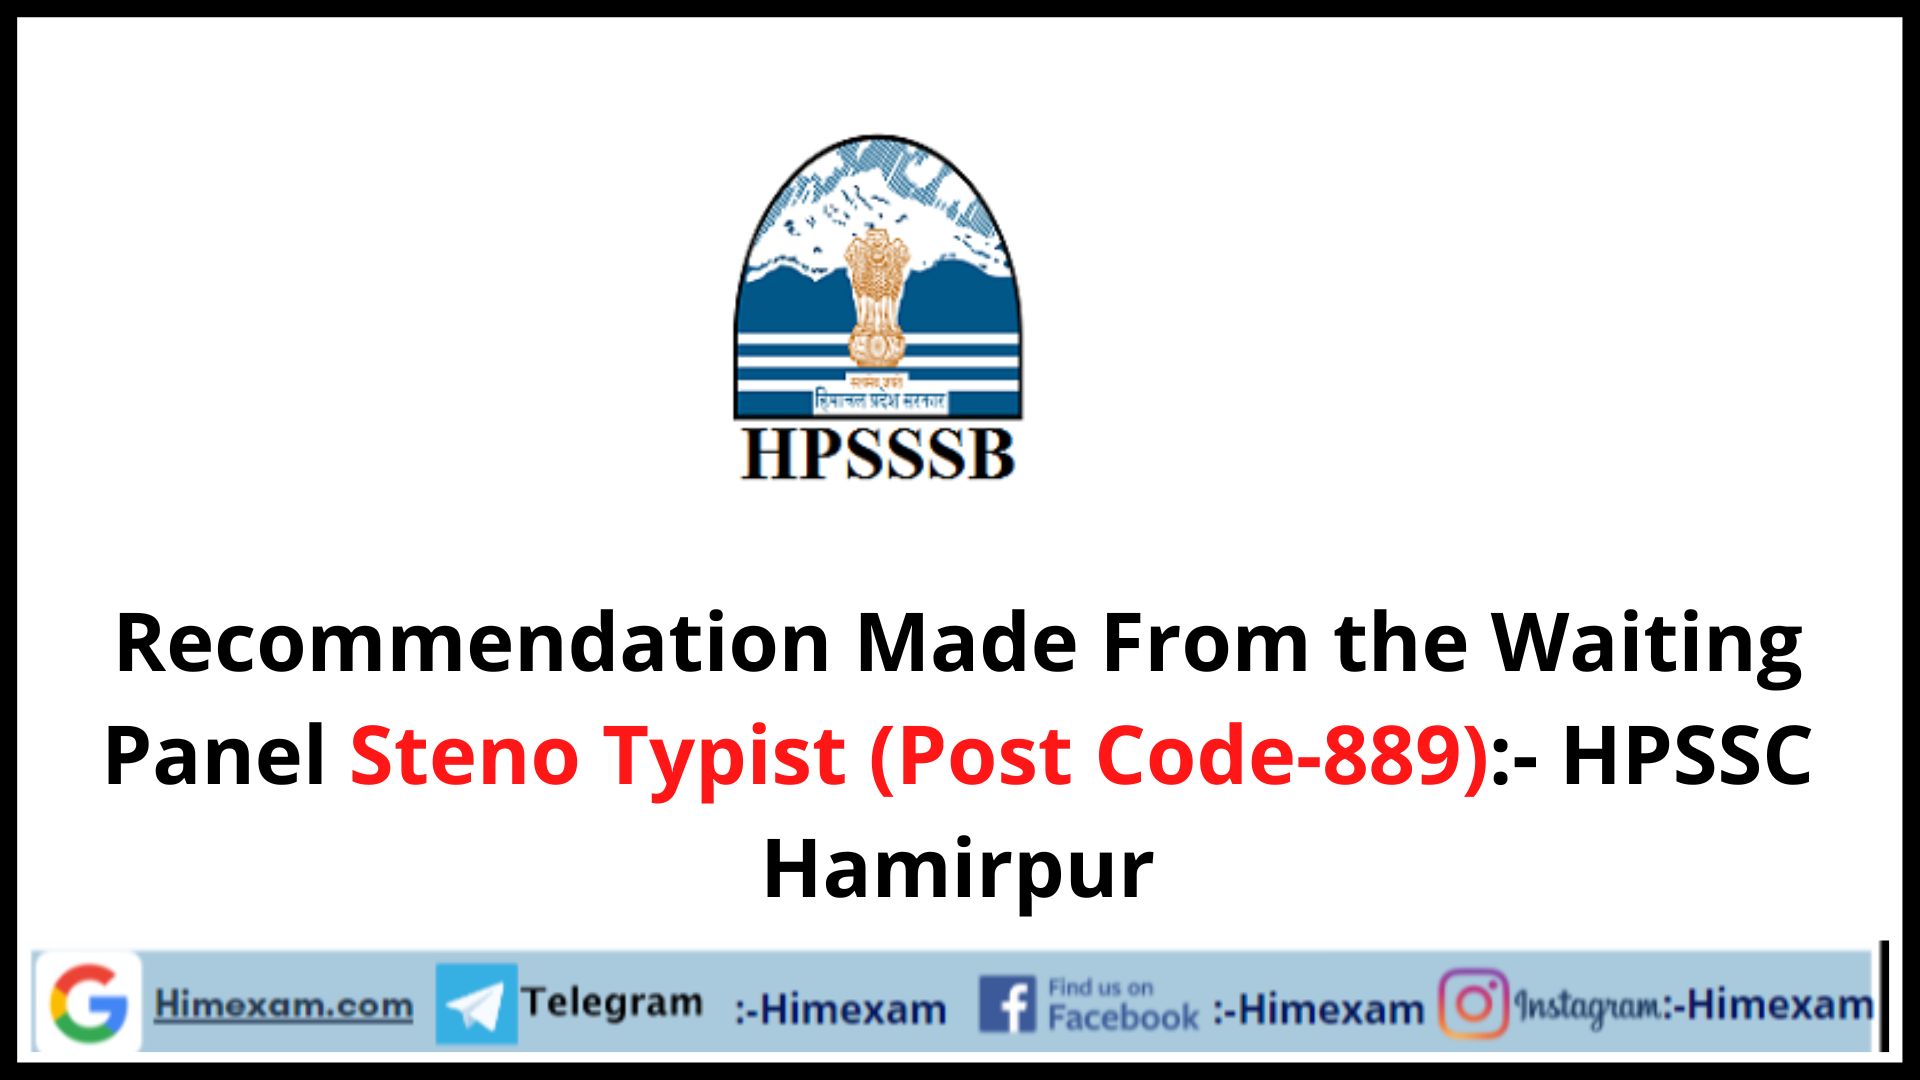 Recommendation Made From the Waiting Panel  Steno Typist (Post Code-889):- HPSSC Hamirpur